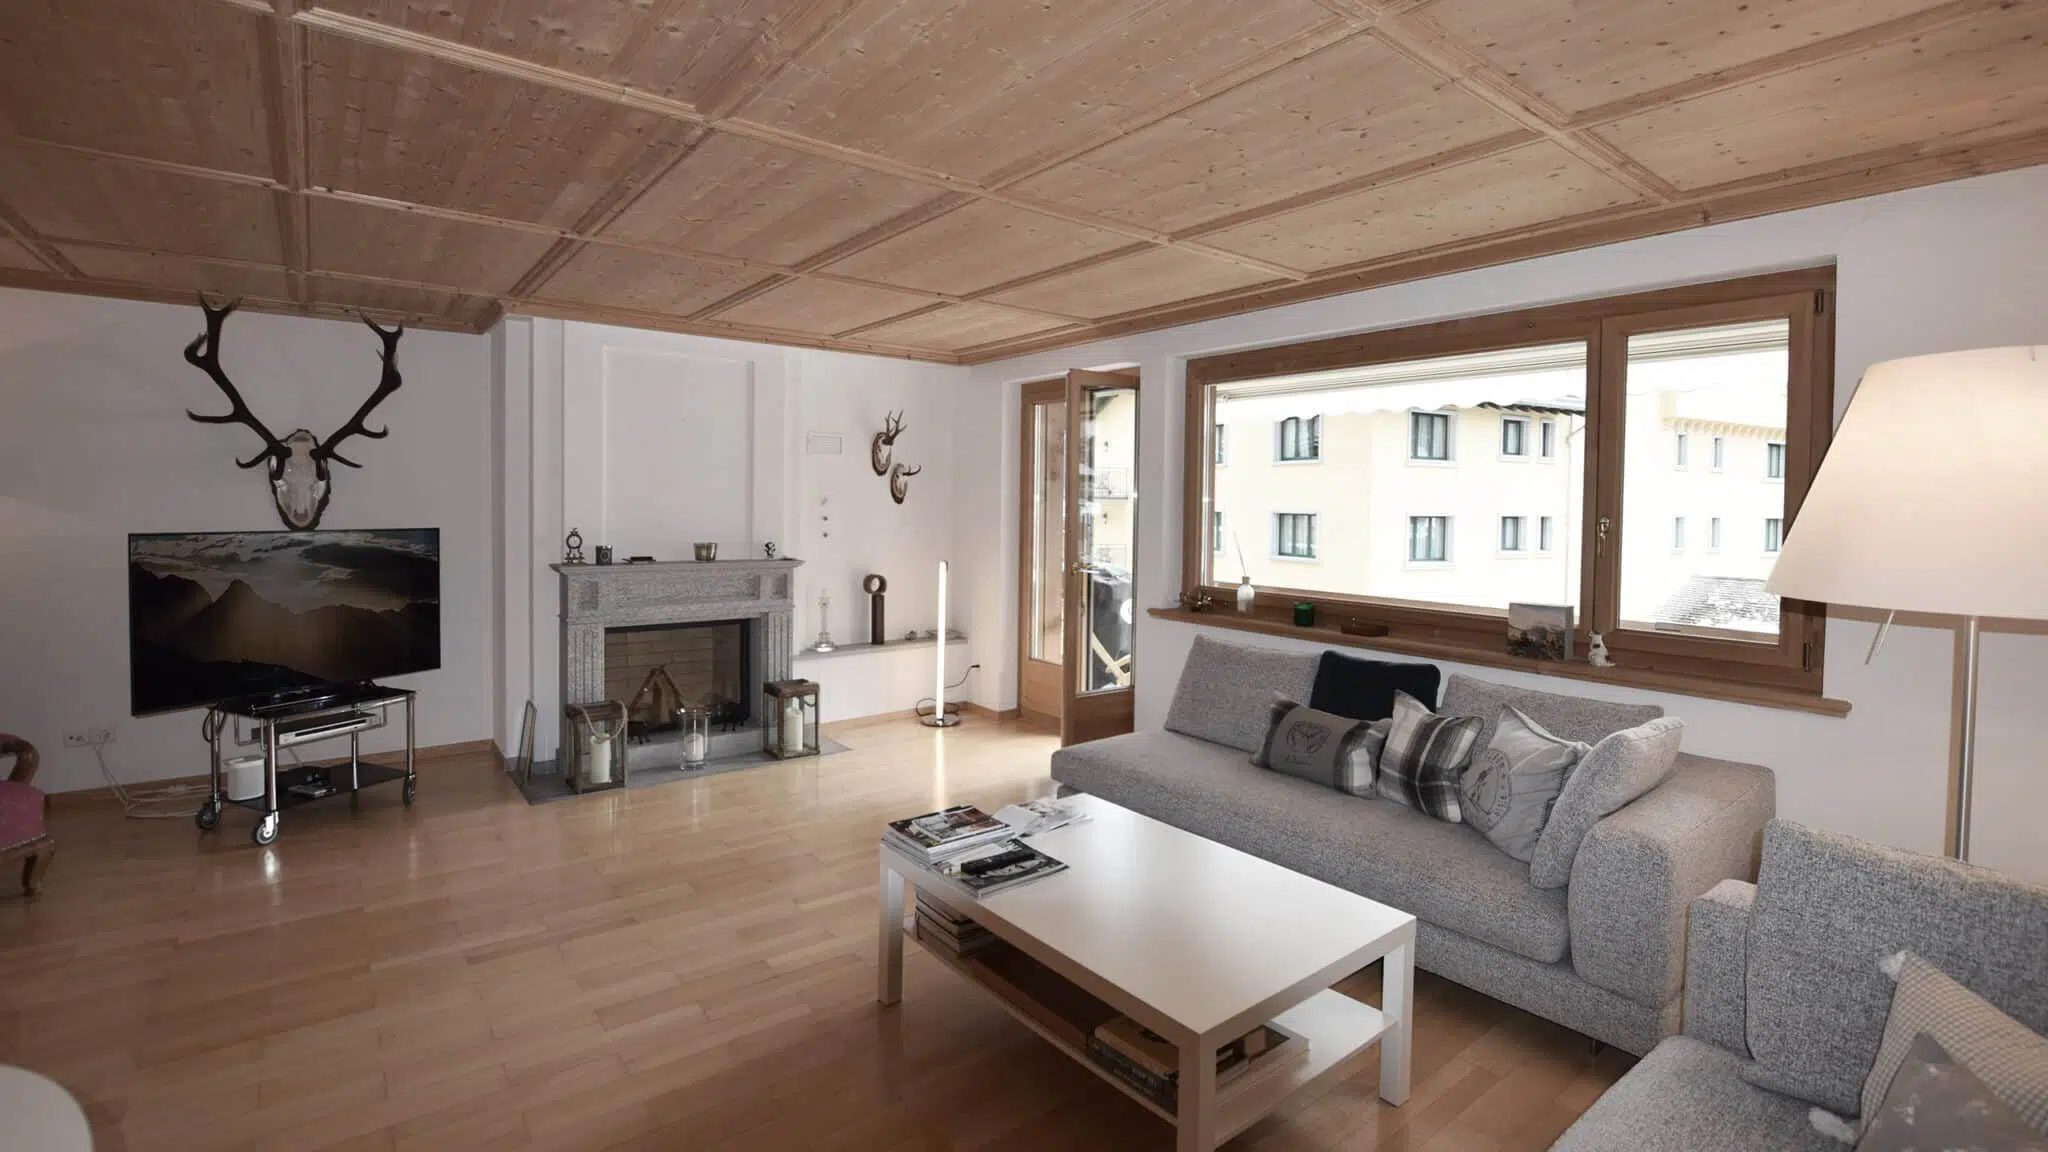 Holiday rental flats in Klosters